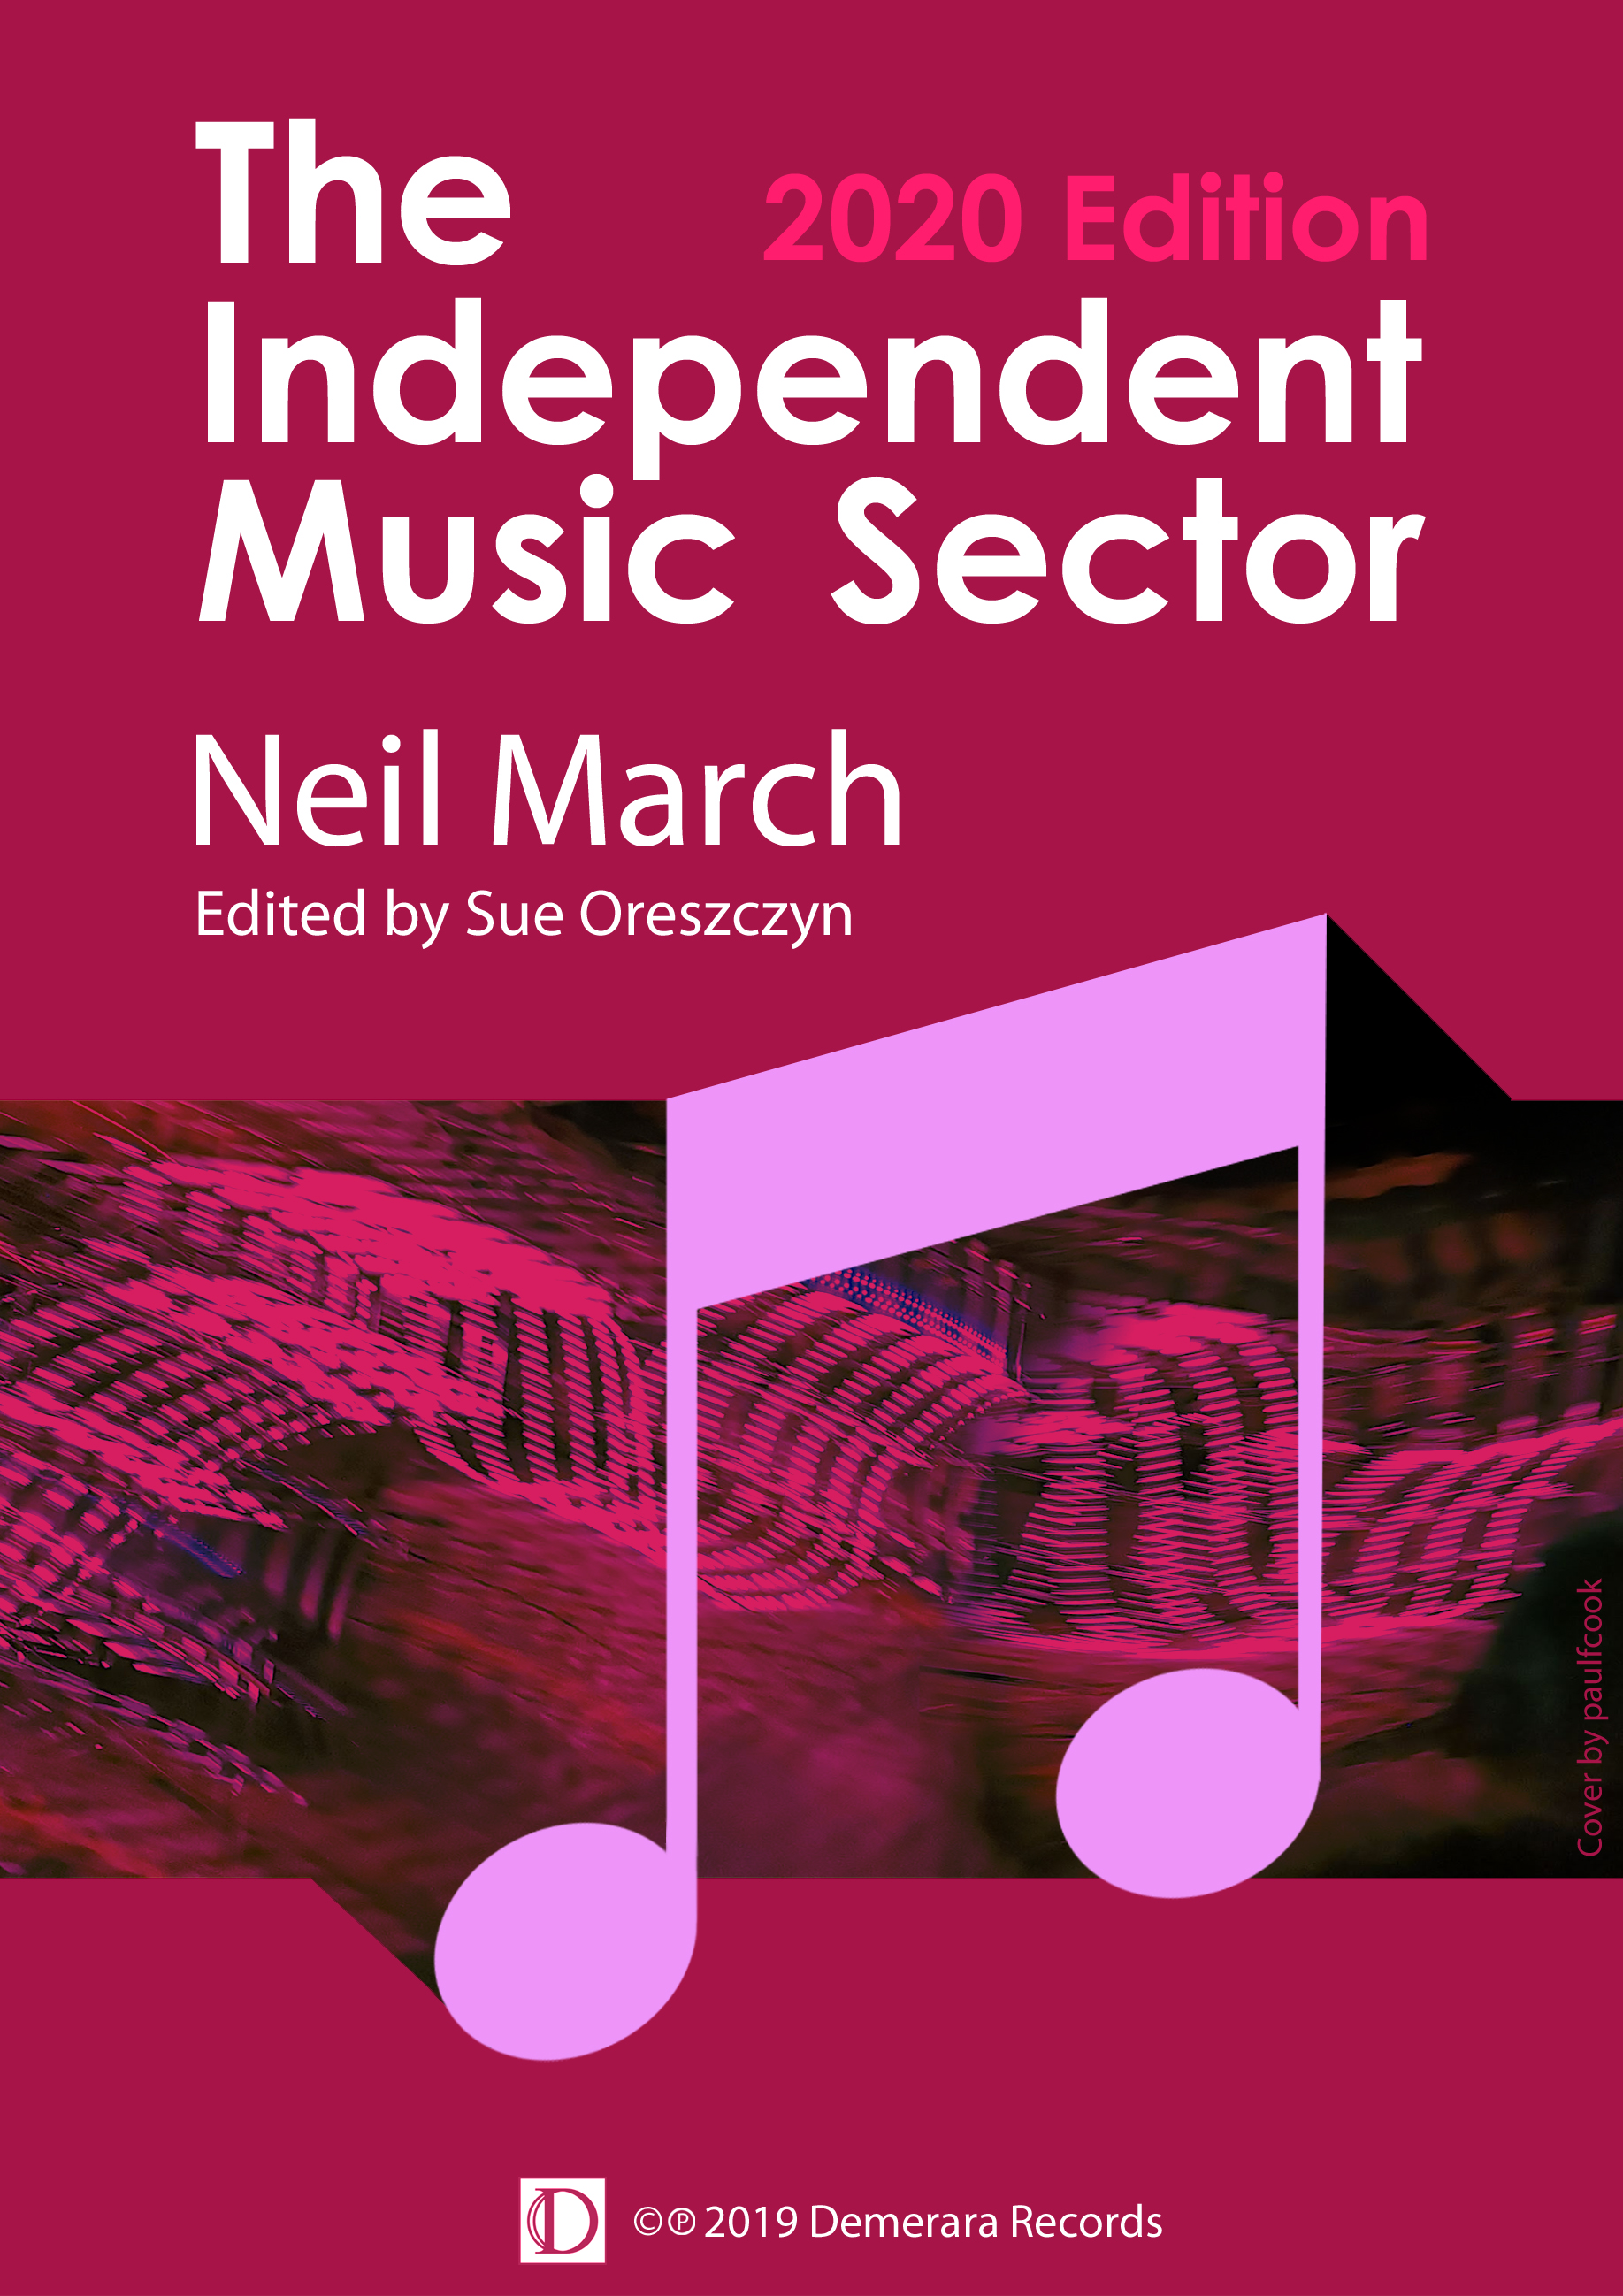 NM-Indie Music Sector-2020 Edition-COVER-3